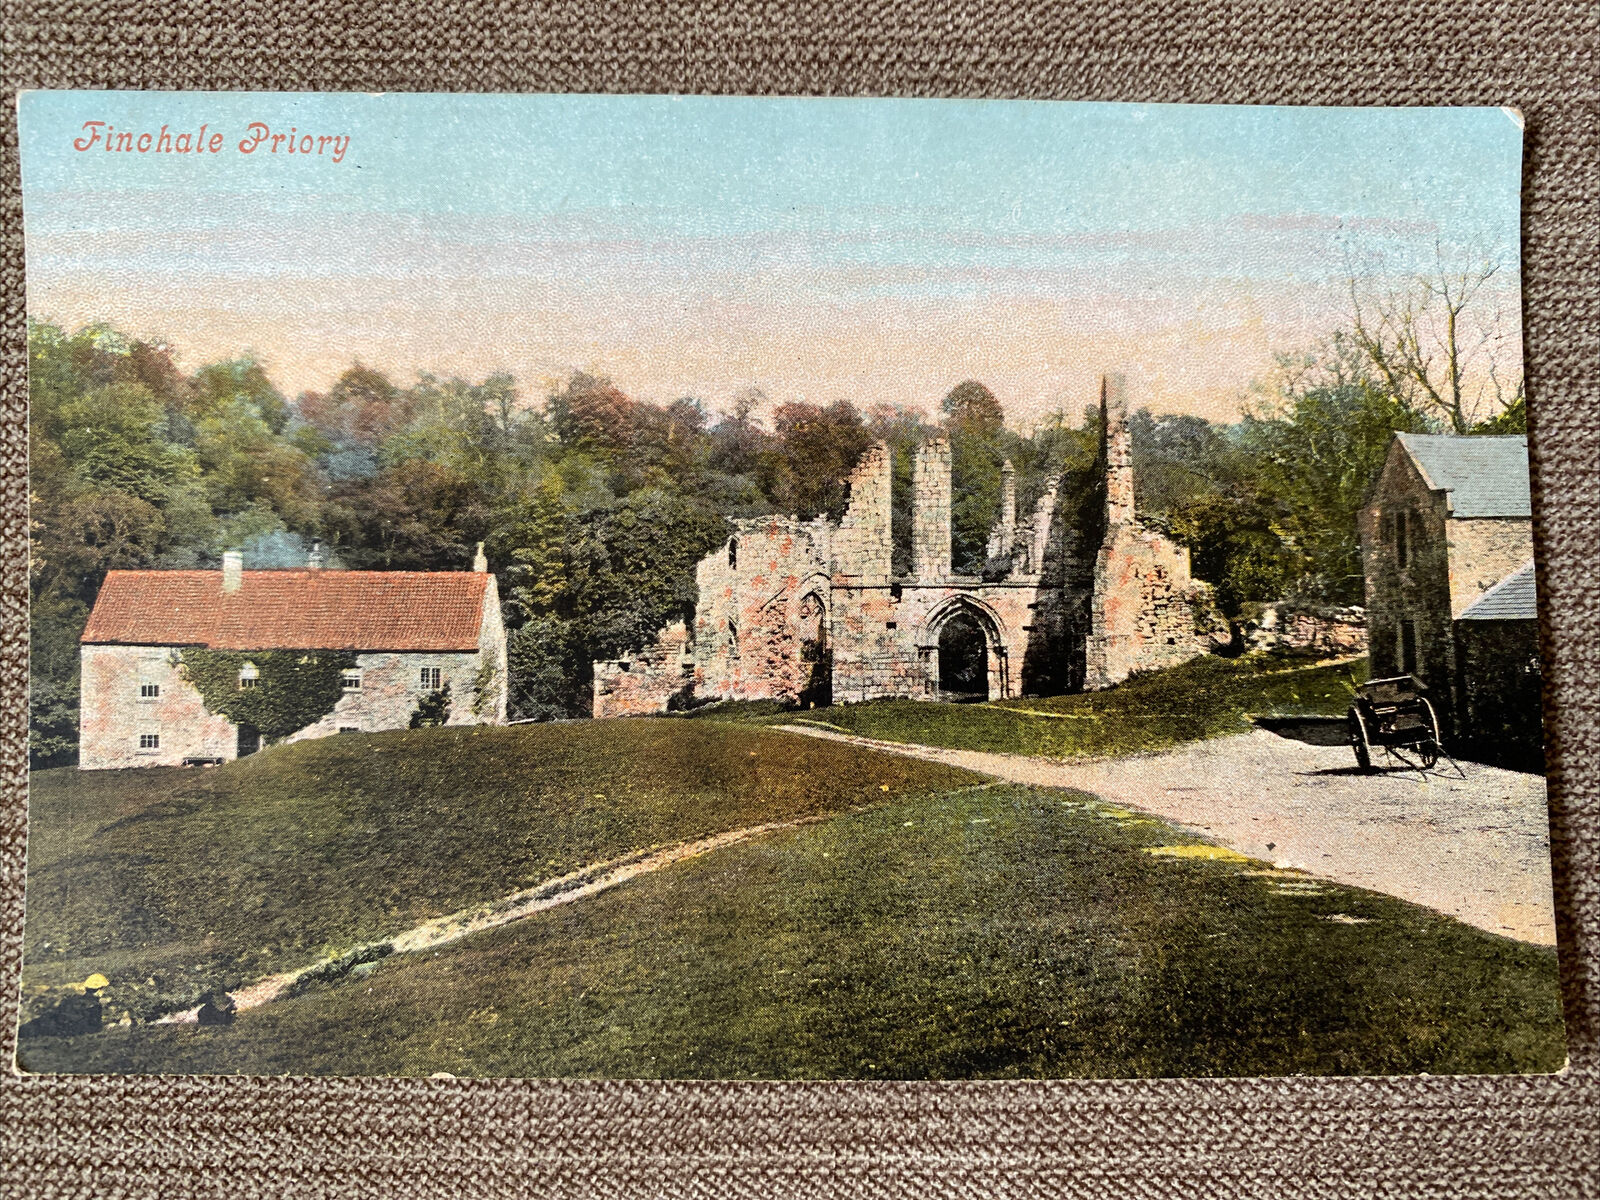 House Clearance - Finchale Priory. Durham, Early Valentine Service. c1905